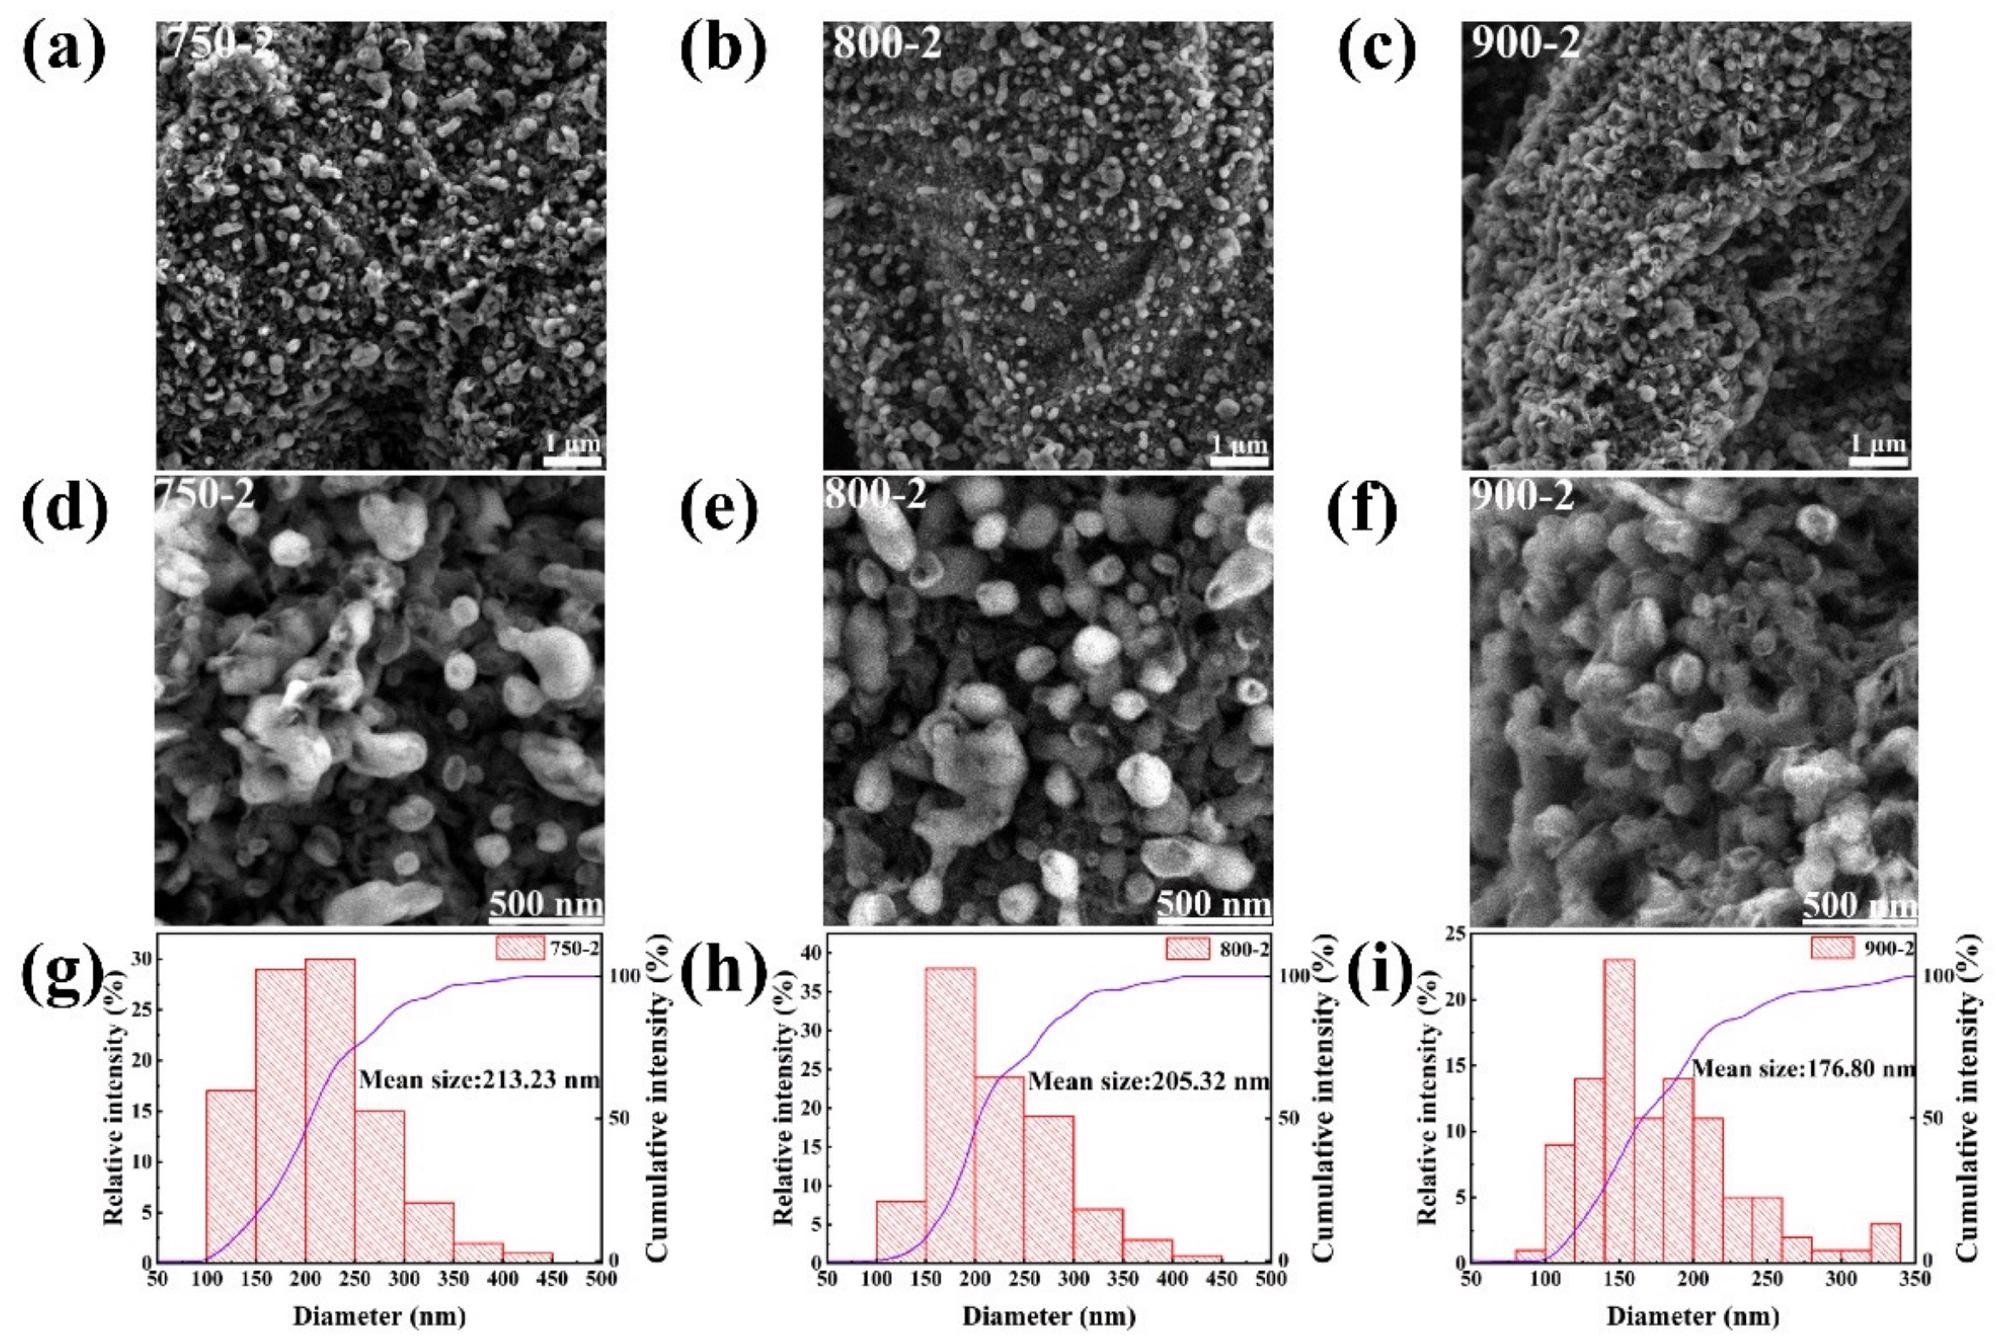 (a,d) SEM images of 750-2; (b,e) SEM images of 800-2; (c,f) SEM images of 900-2; (g–i) Particle size distribution of 750-2, 800-2, 900-2.